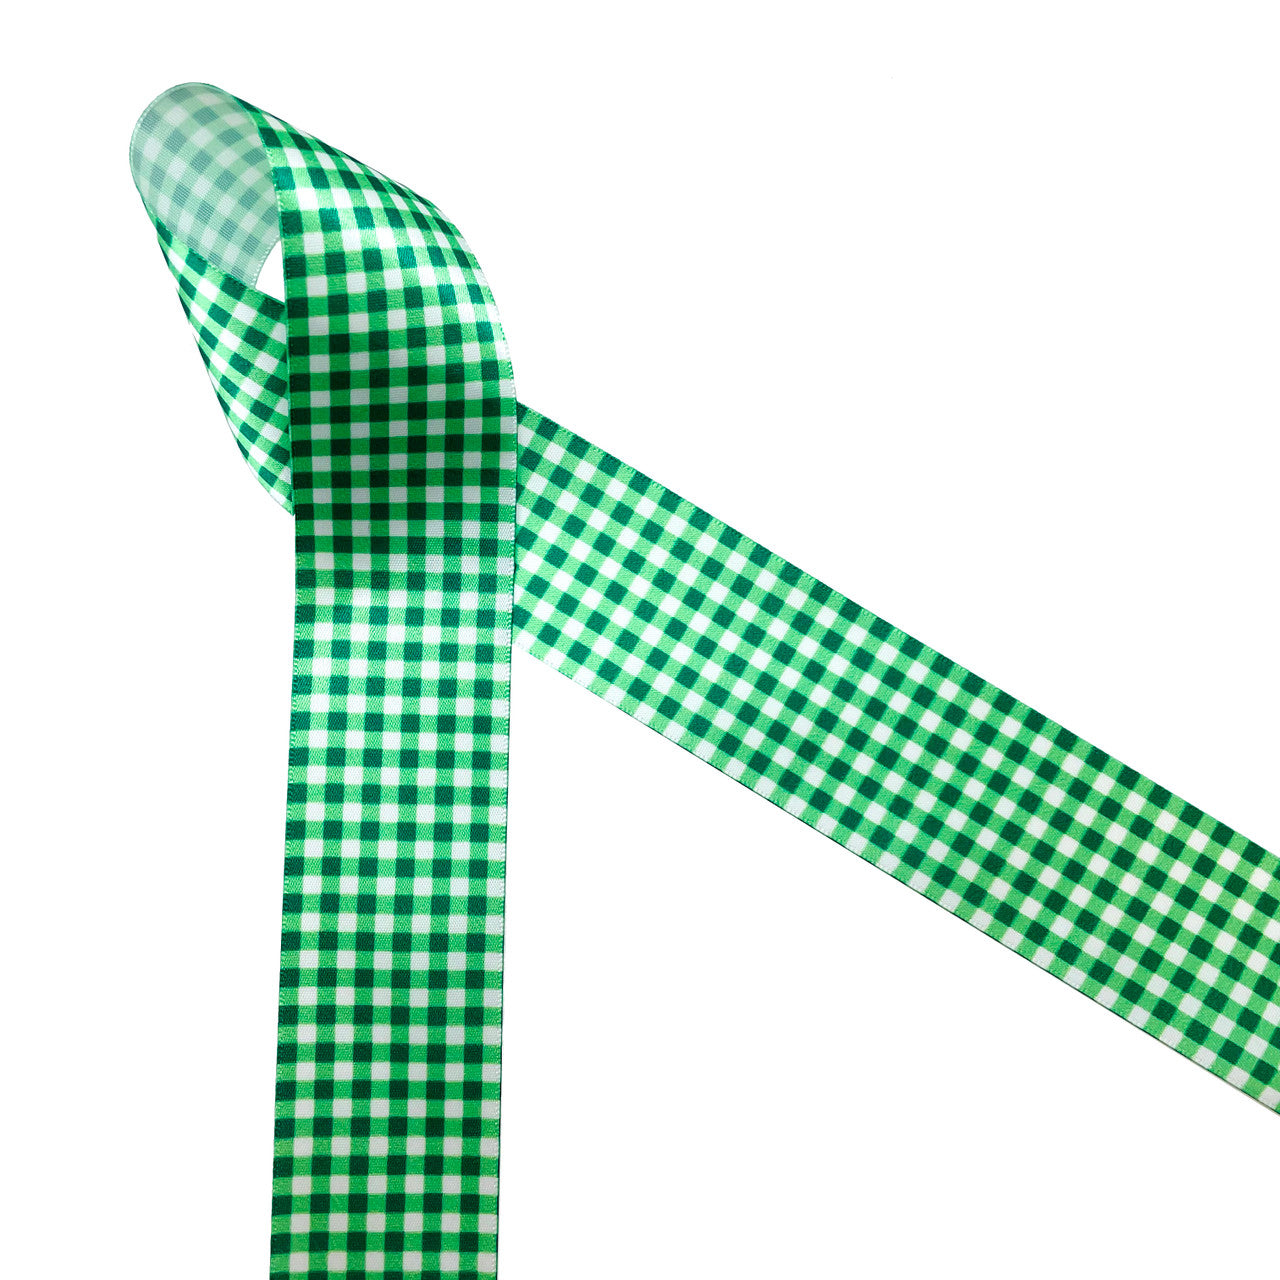 Green and white gingham check printed on 1.5" white single face satin ribbon is perfect for St. Patrick's Day and Spring decor. This is the perfect ribbon for preppy bridal and baby showers too. Use this ribbon for gift wrap, gift baskets and gift boxes. This is a great ribbon for candy shops, chocolatiers, quilters and crafters too. All our ribbon is designed and printed in the USA